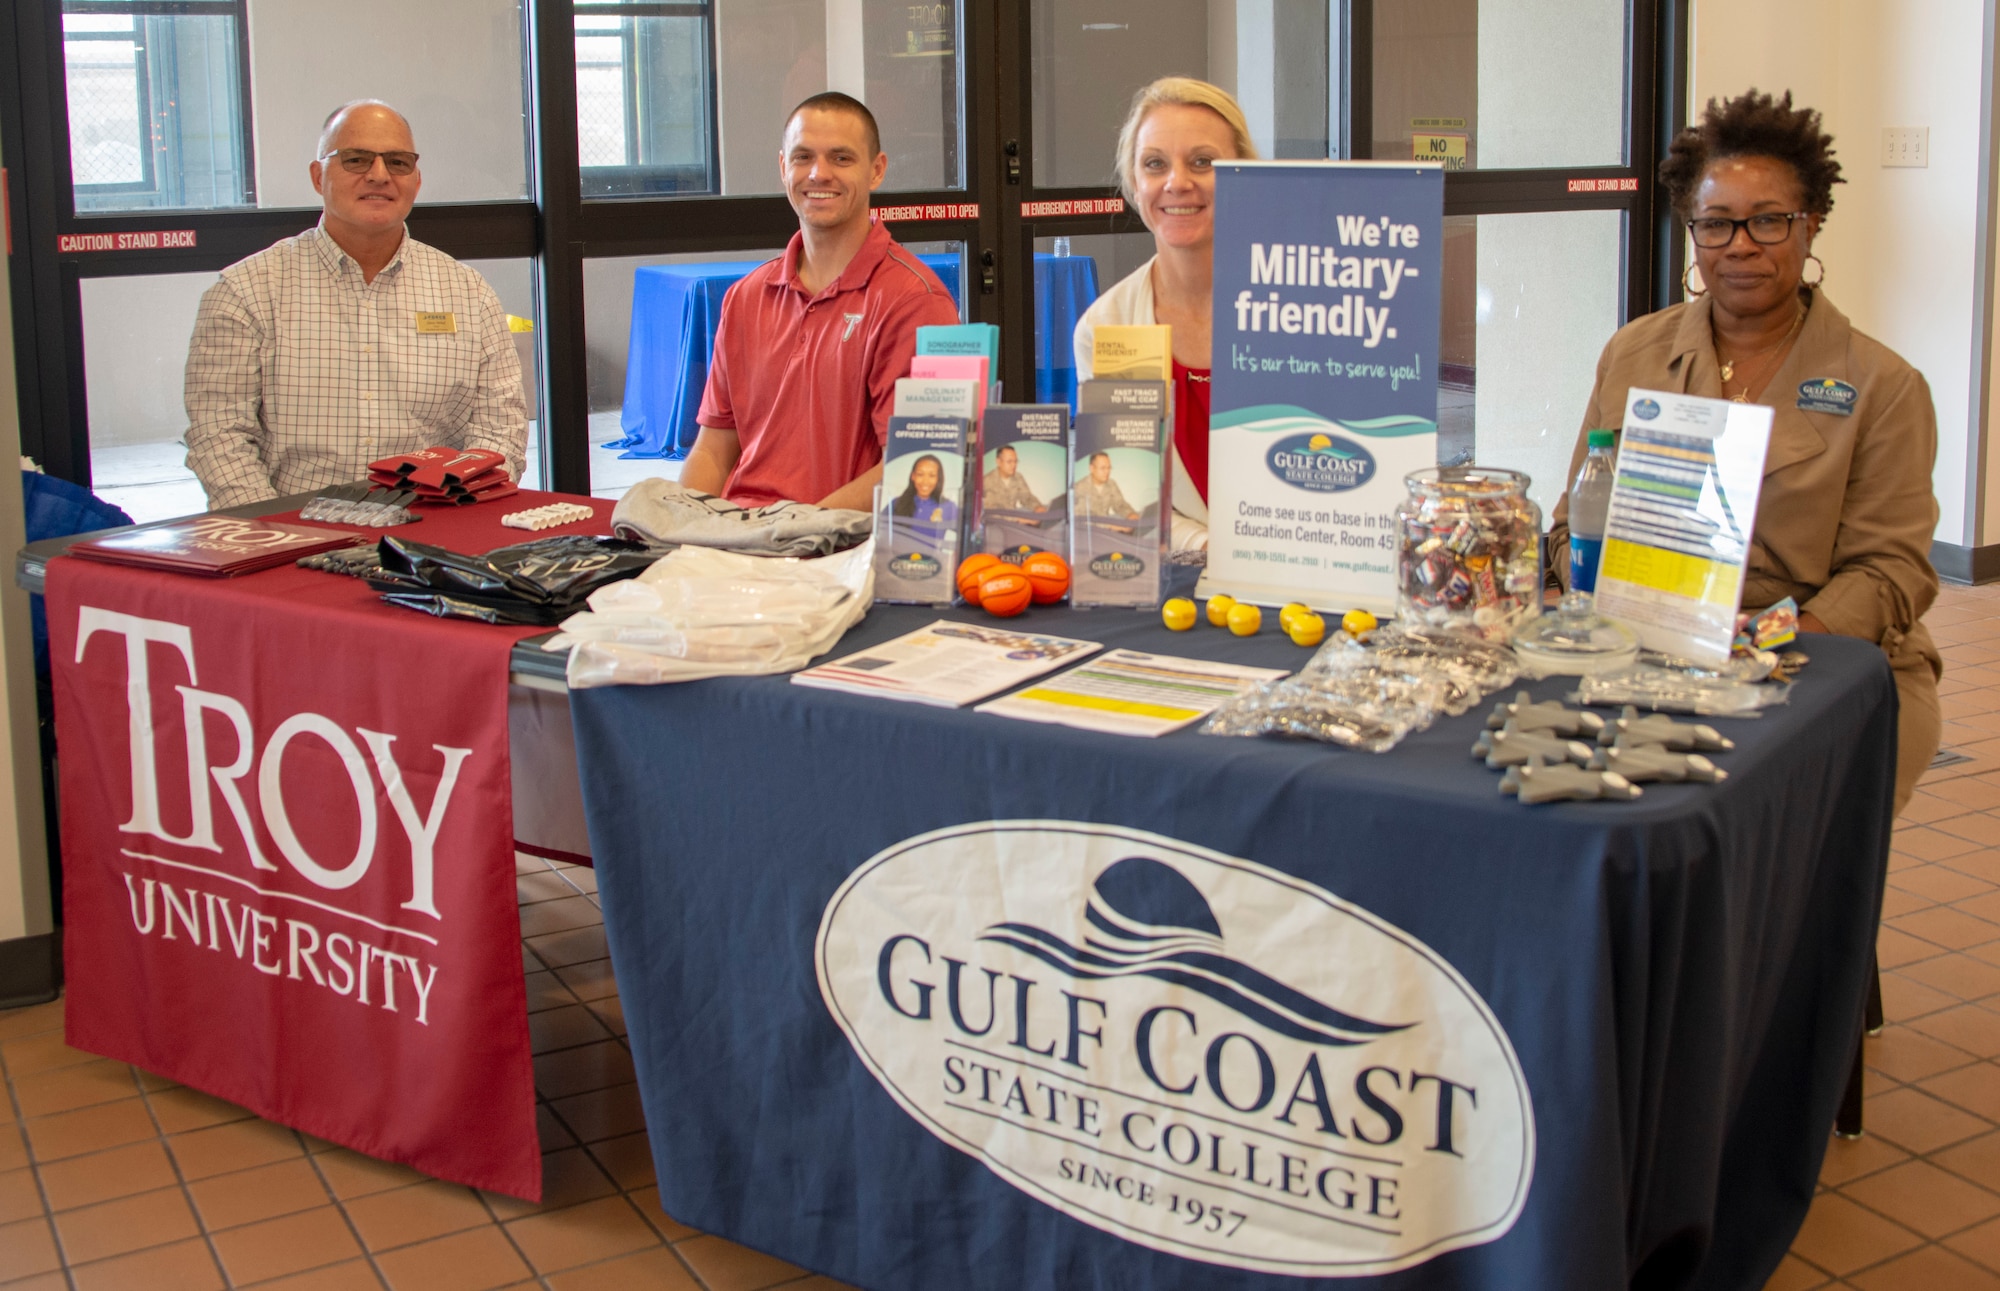 Representatives from the base education office, Troy University, Embry Riddle Aeronautical University, and Gulf Coast State College sit at the Base Exchange food court to answer questions and assist students with enrollment at Tyndall Air Force Base, Florida, Dec. 9, 2019. The 325th Force Support Squadron hosted the education outreach event to help current and prospective students navigate education benefits, on-base schools, and the variety of degree programs offered. (U.S. Air Force photo by 2nd Lt. Kayla Fitzgerald)